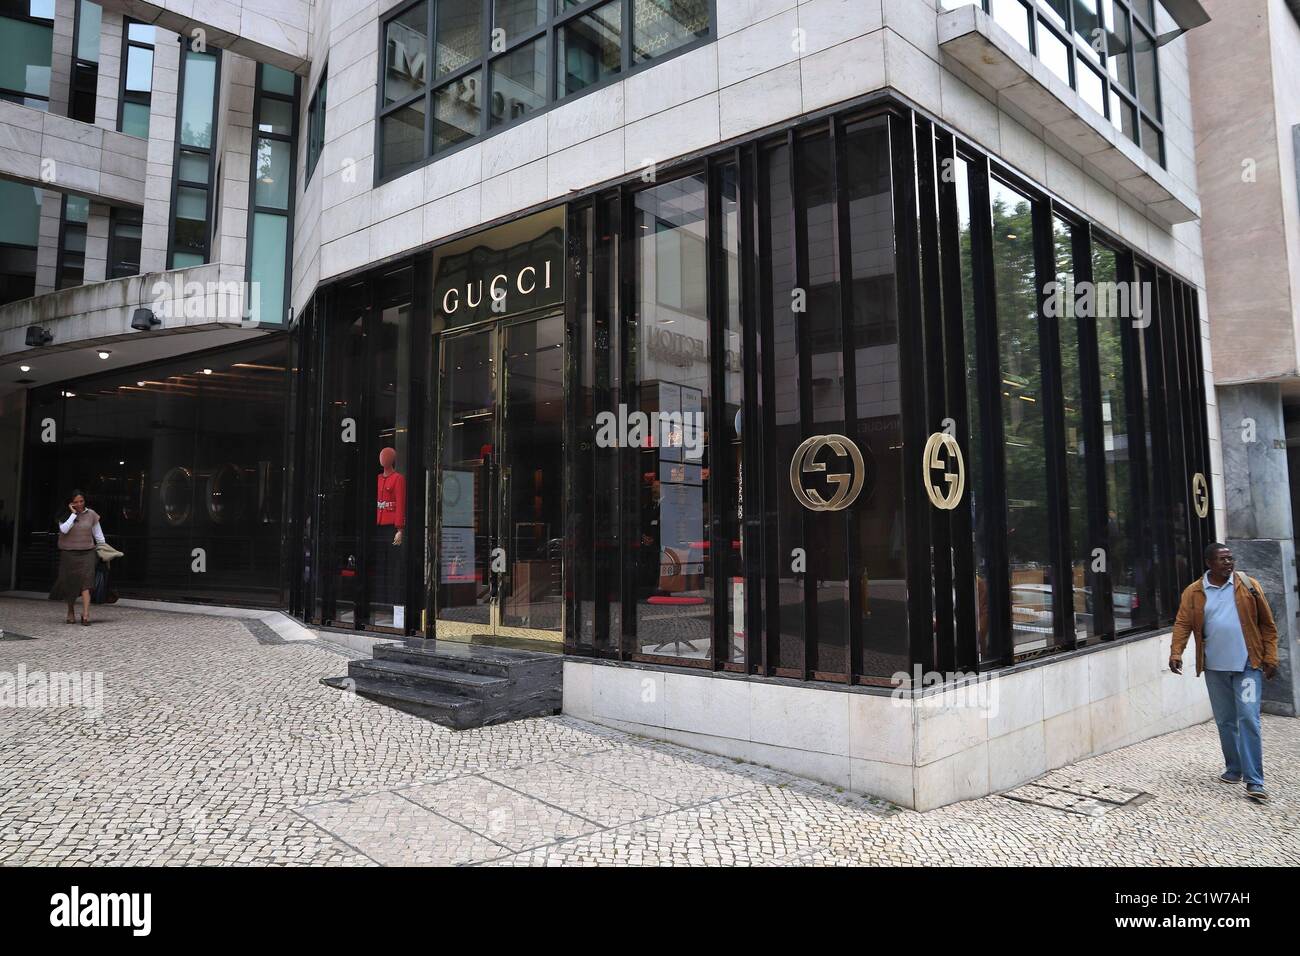 LISBON, PORTUGAL - JUNE 6, 2018: Gucci fashion shop at Avenida da Liberdade  in Lisbon. This famous boulevard is renowned for luxury brand shopping and  Stock Photo - Alamy